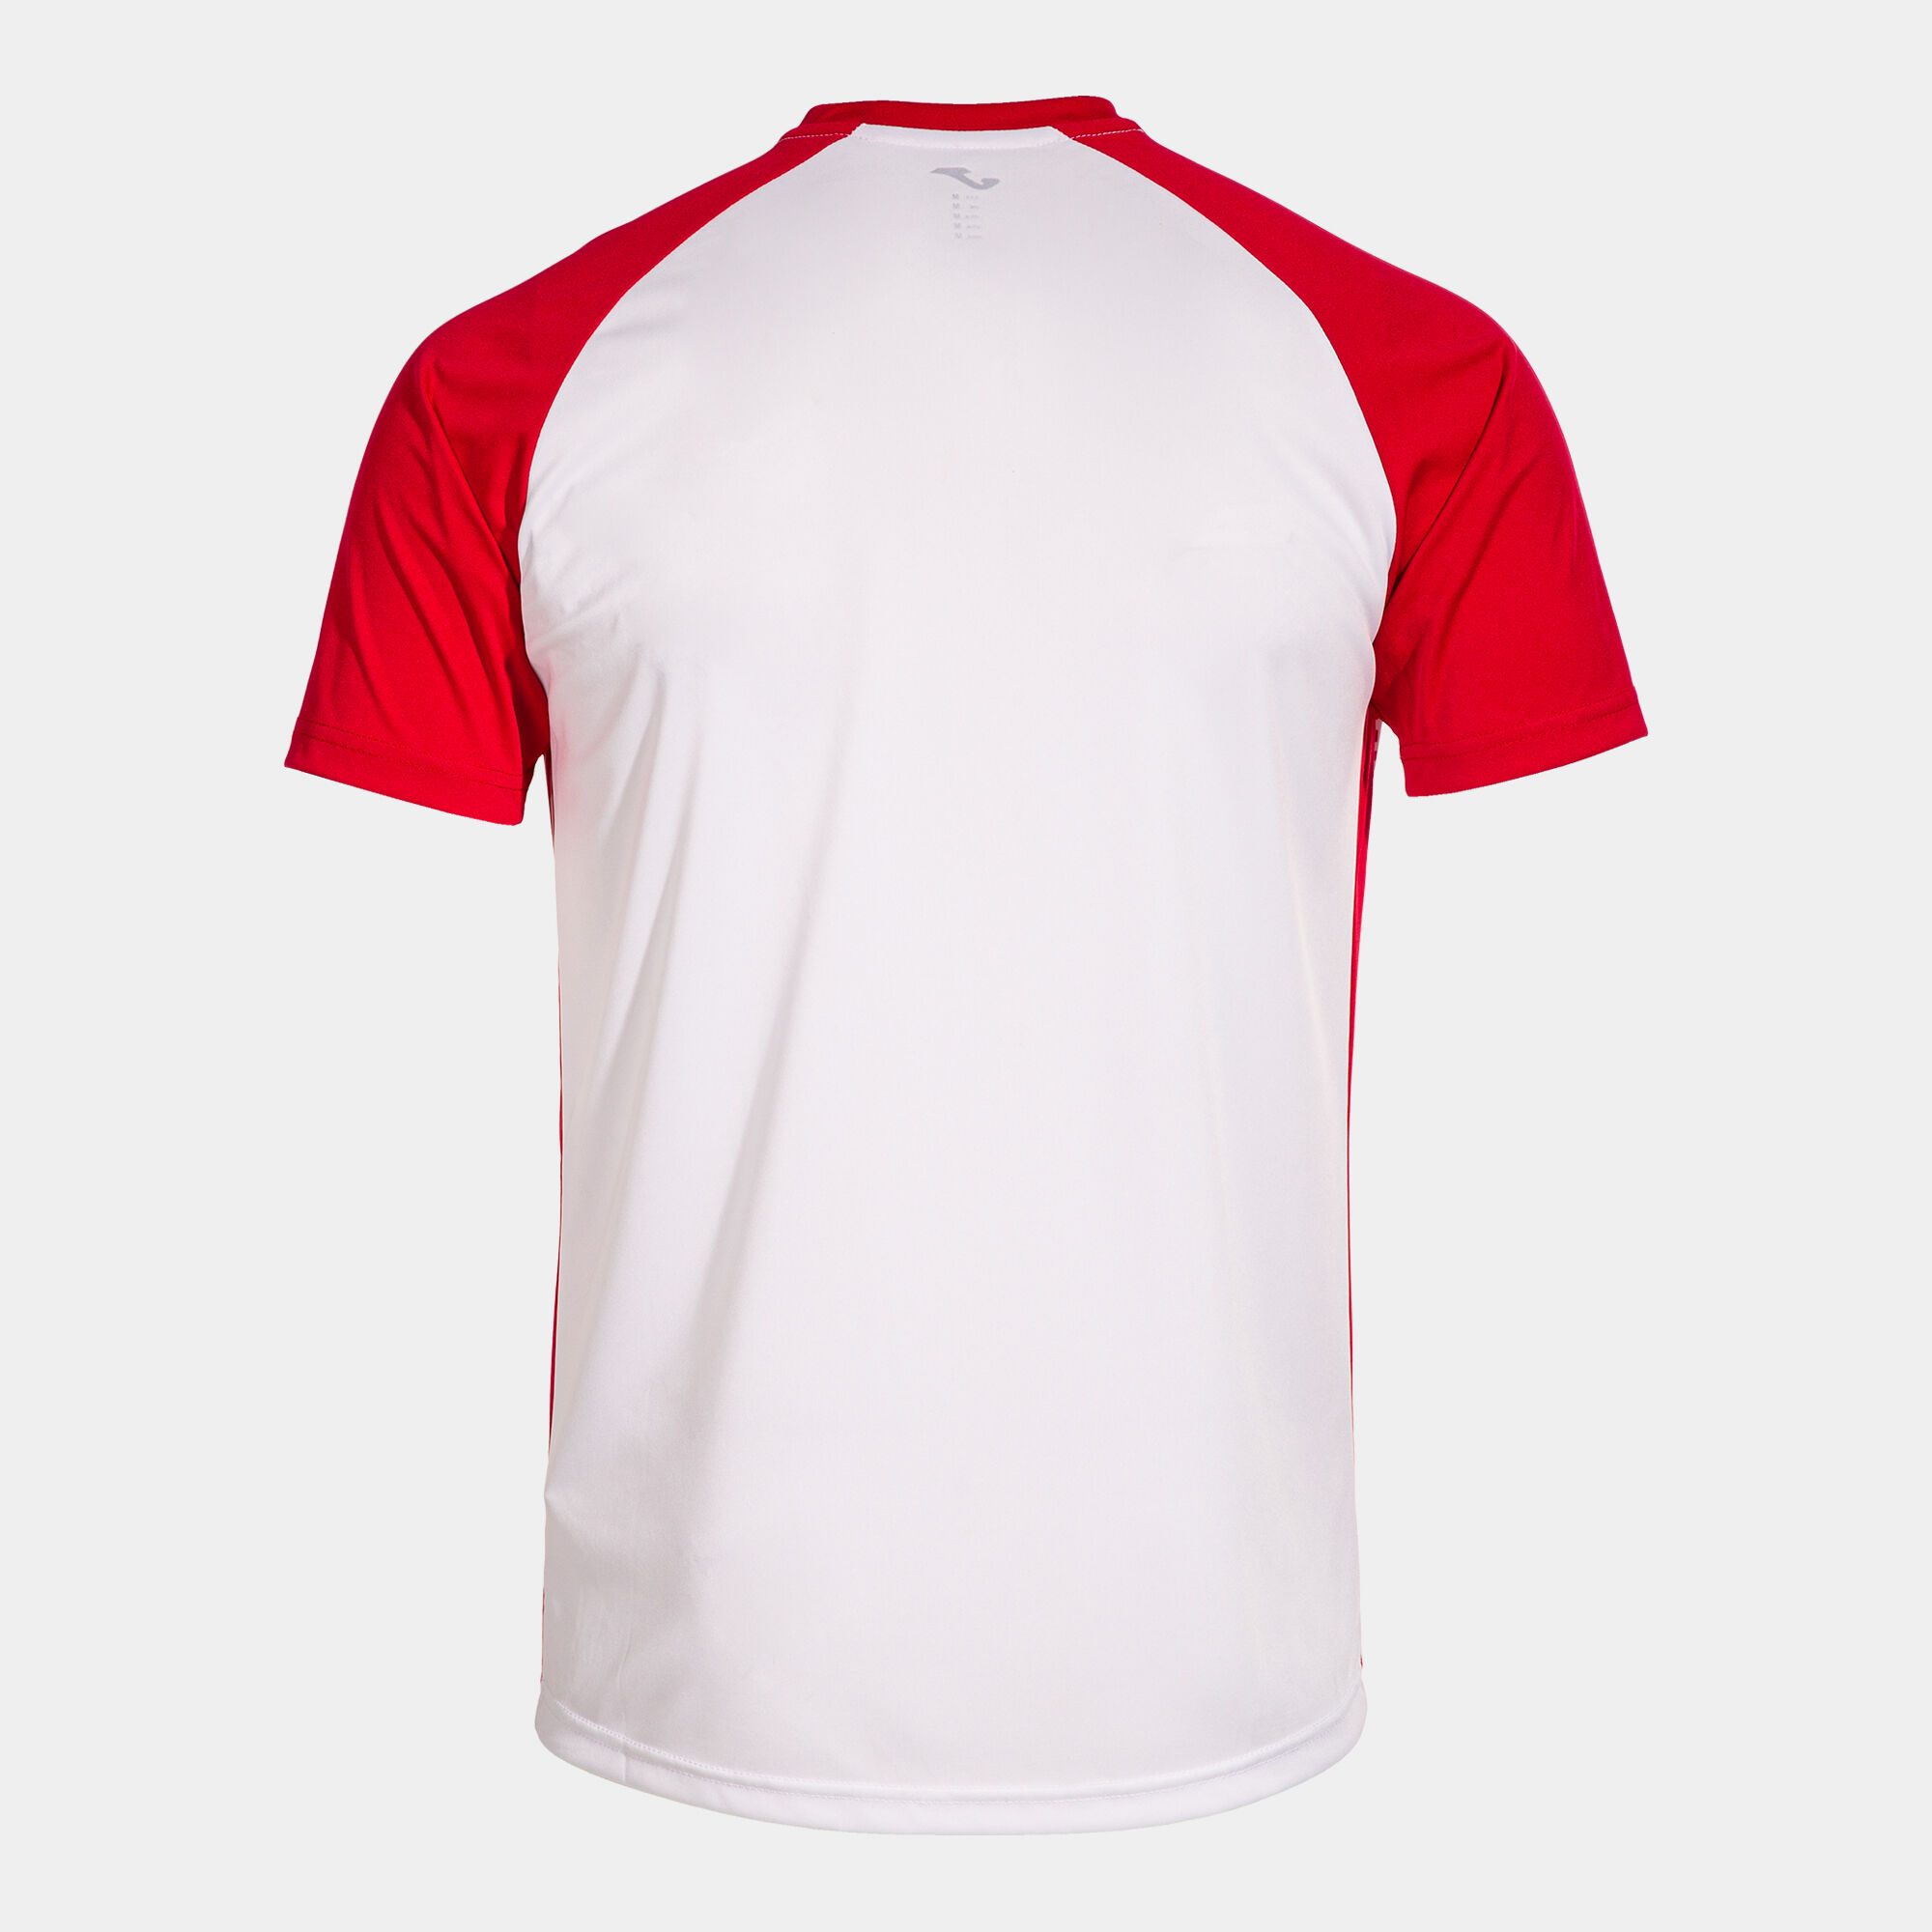 Maillot manches courtes homme Tiger VI blanc rouge